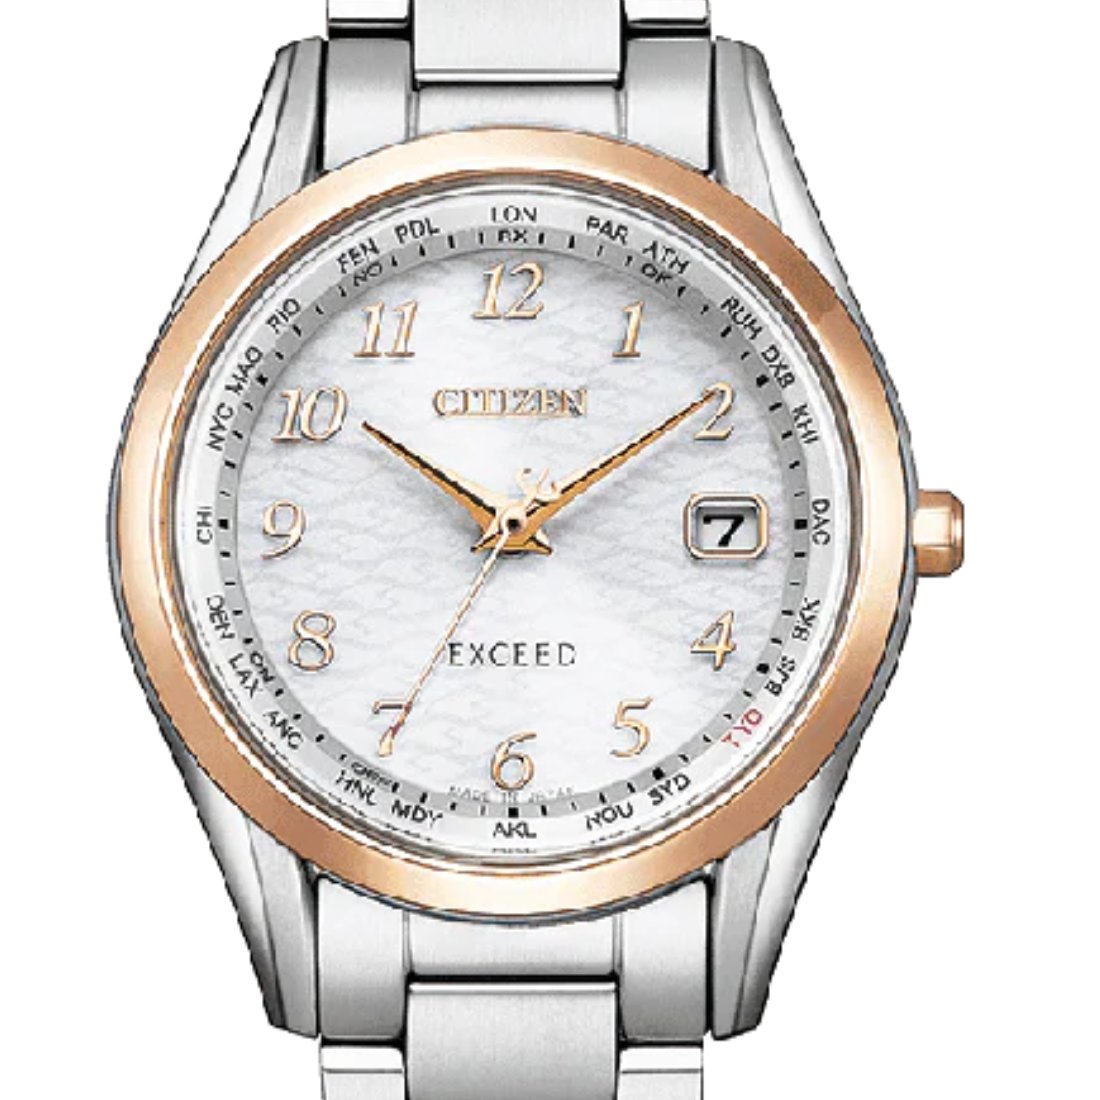 Citizen ES9375-51A Exceed Limited Edition Eco-Drive Casual Watch (PRE-ORDER) -Citizen